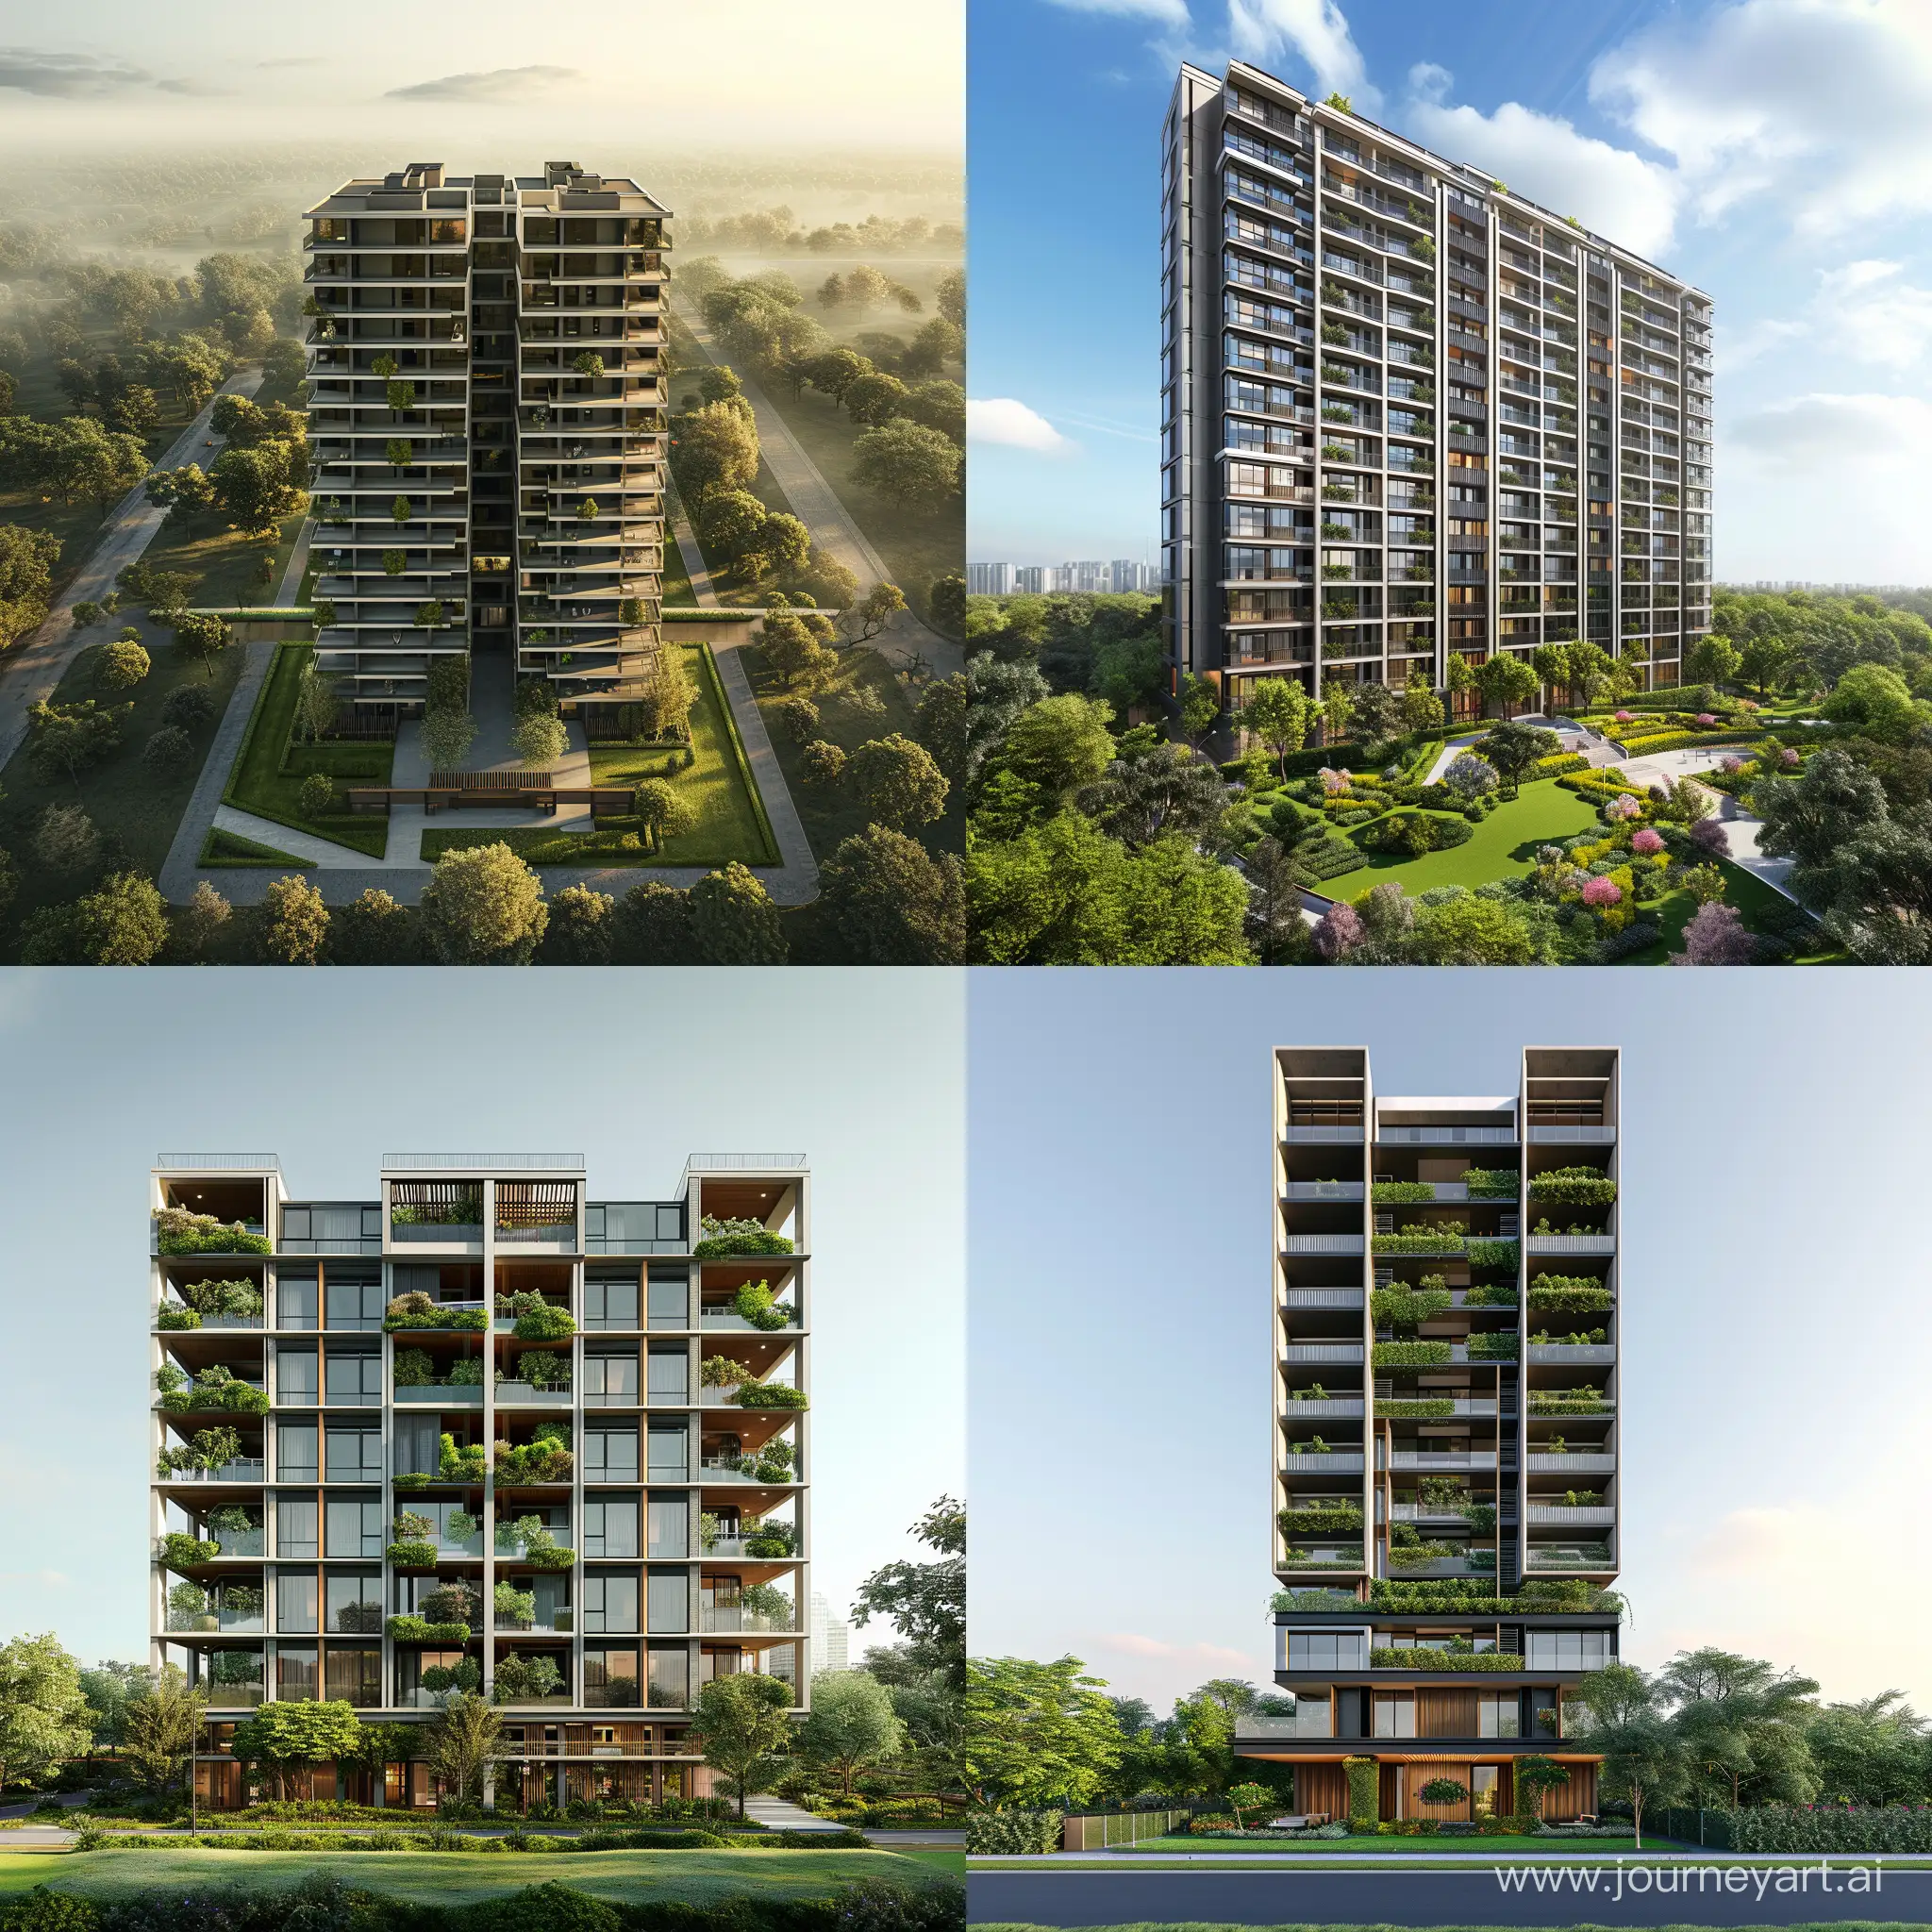 HighQuality-5Floor-Residential-Building-Architectural-Render-with-Green-Landscape